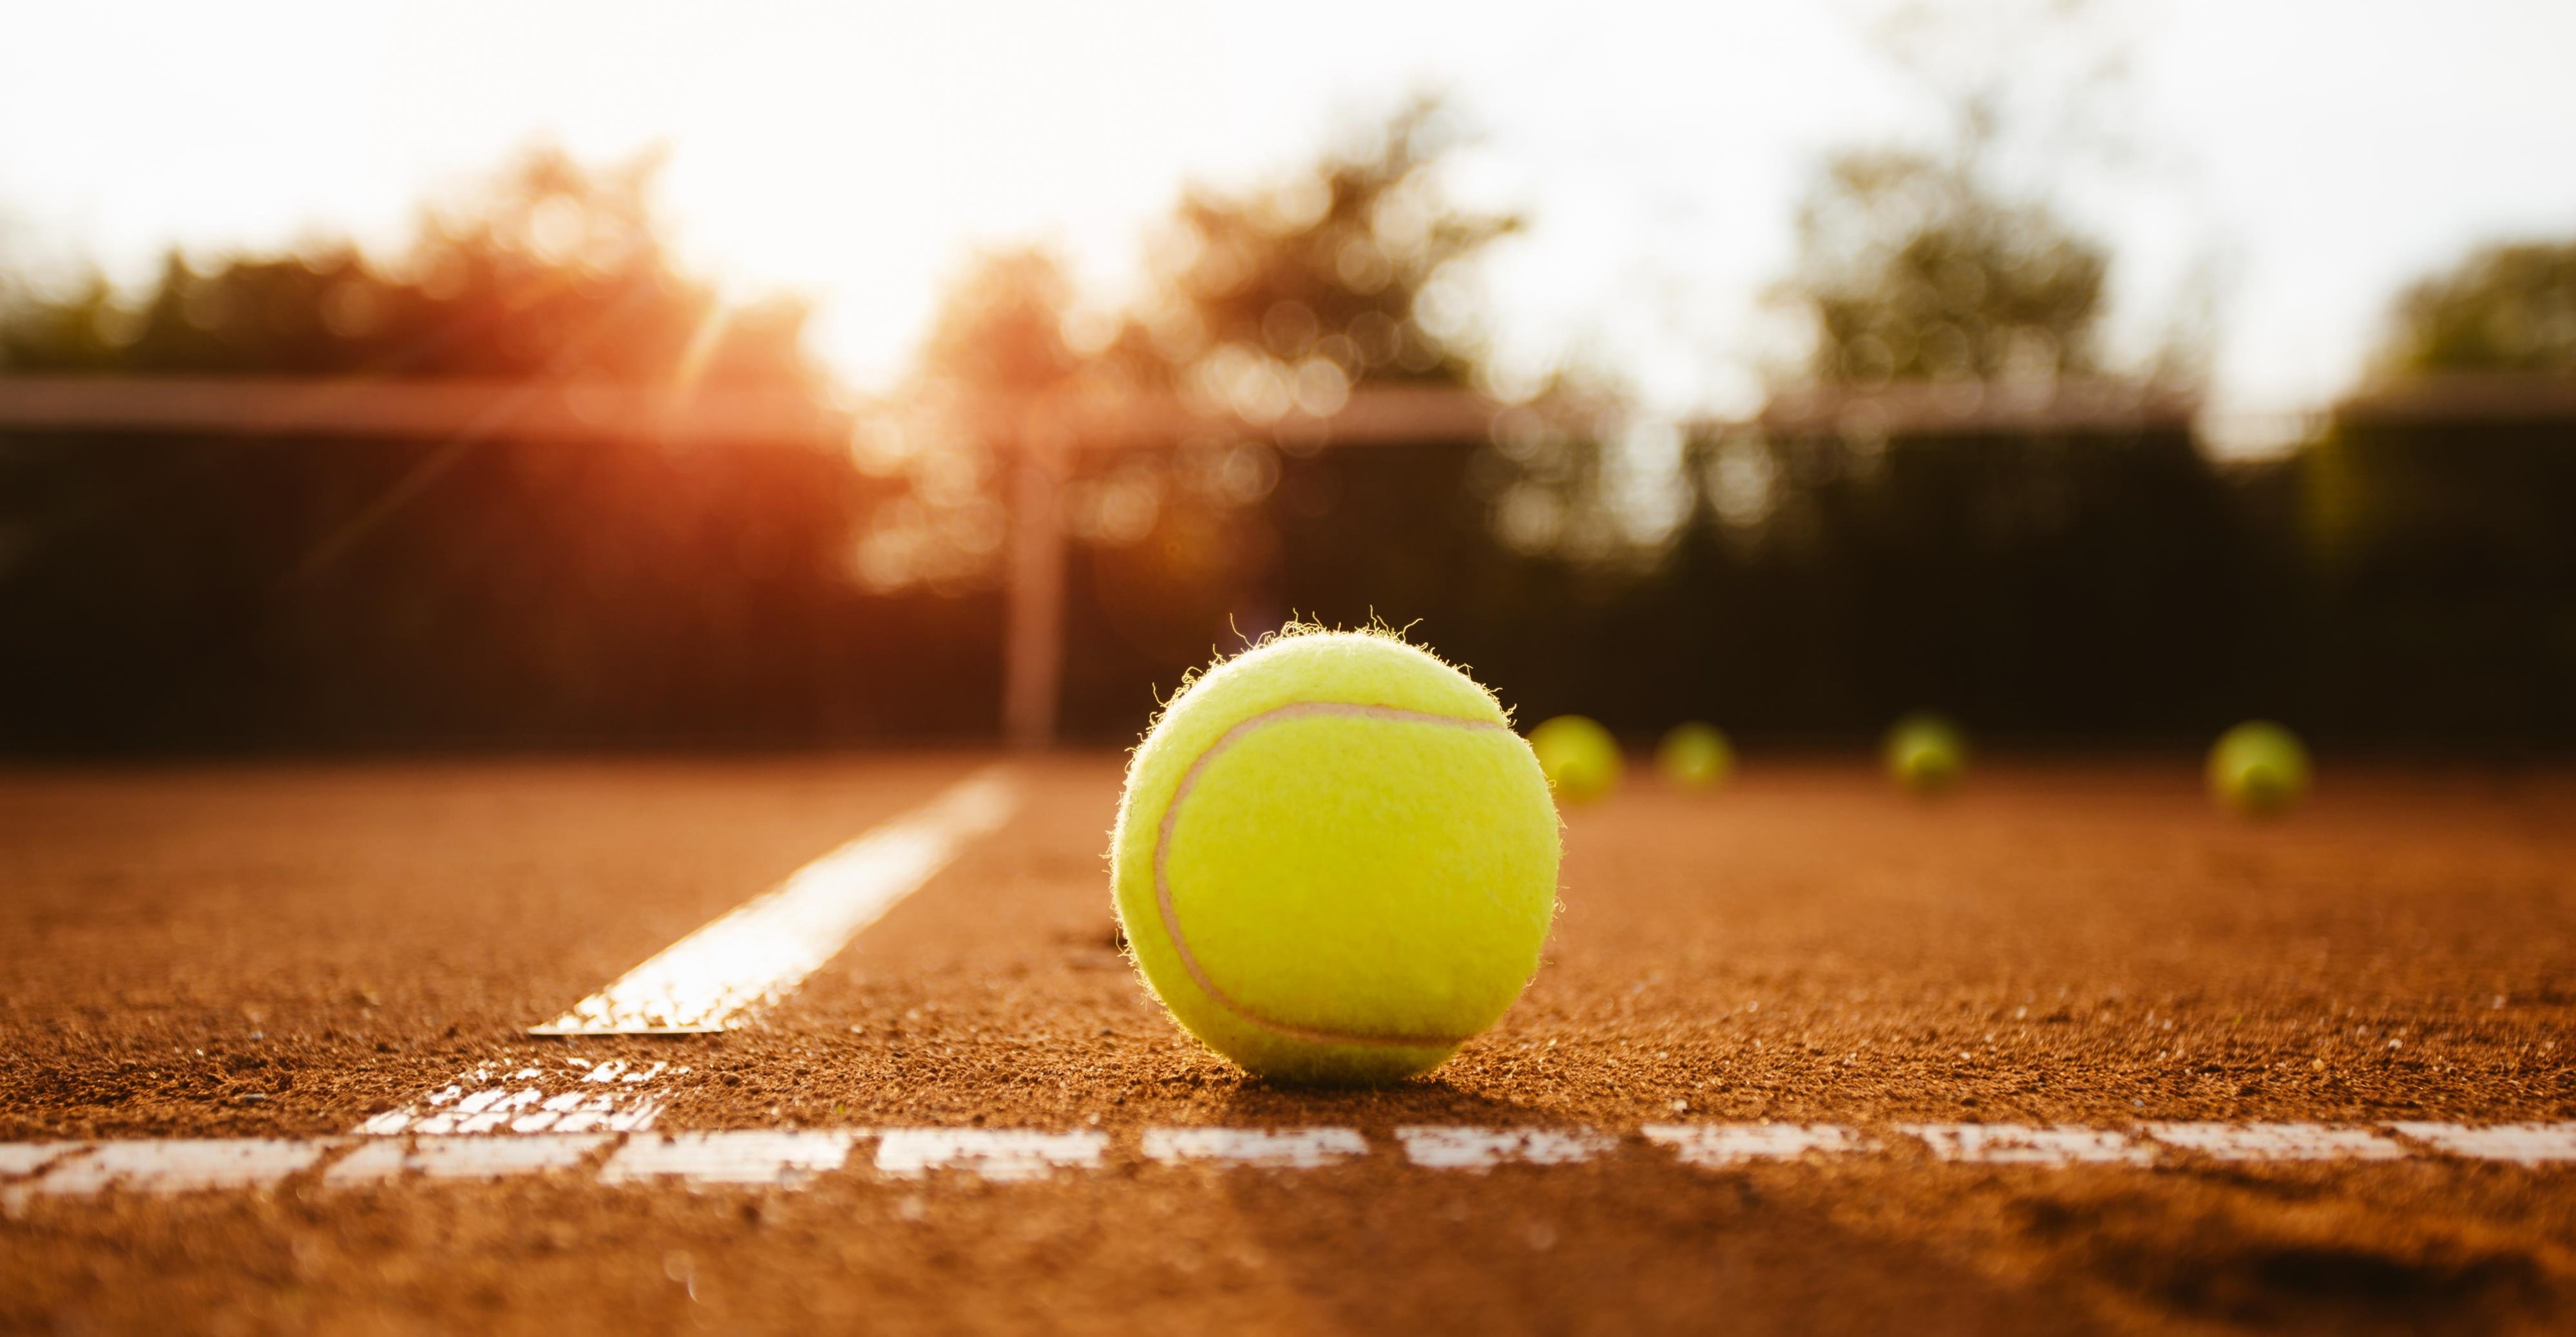 Tennis association fined for selling members’ personal data